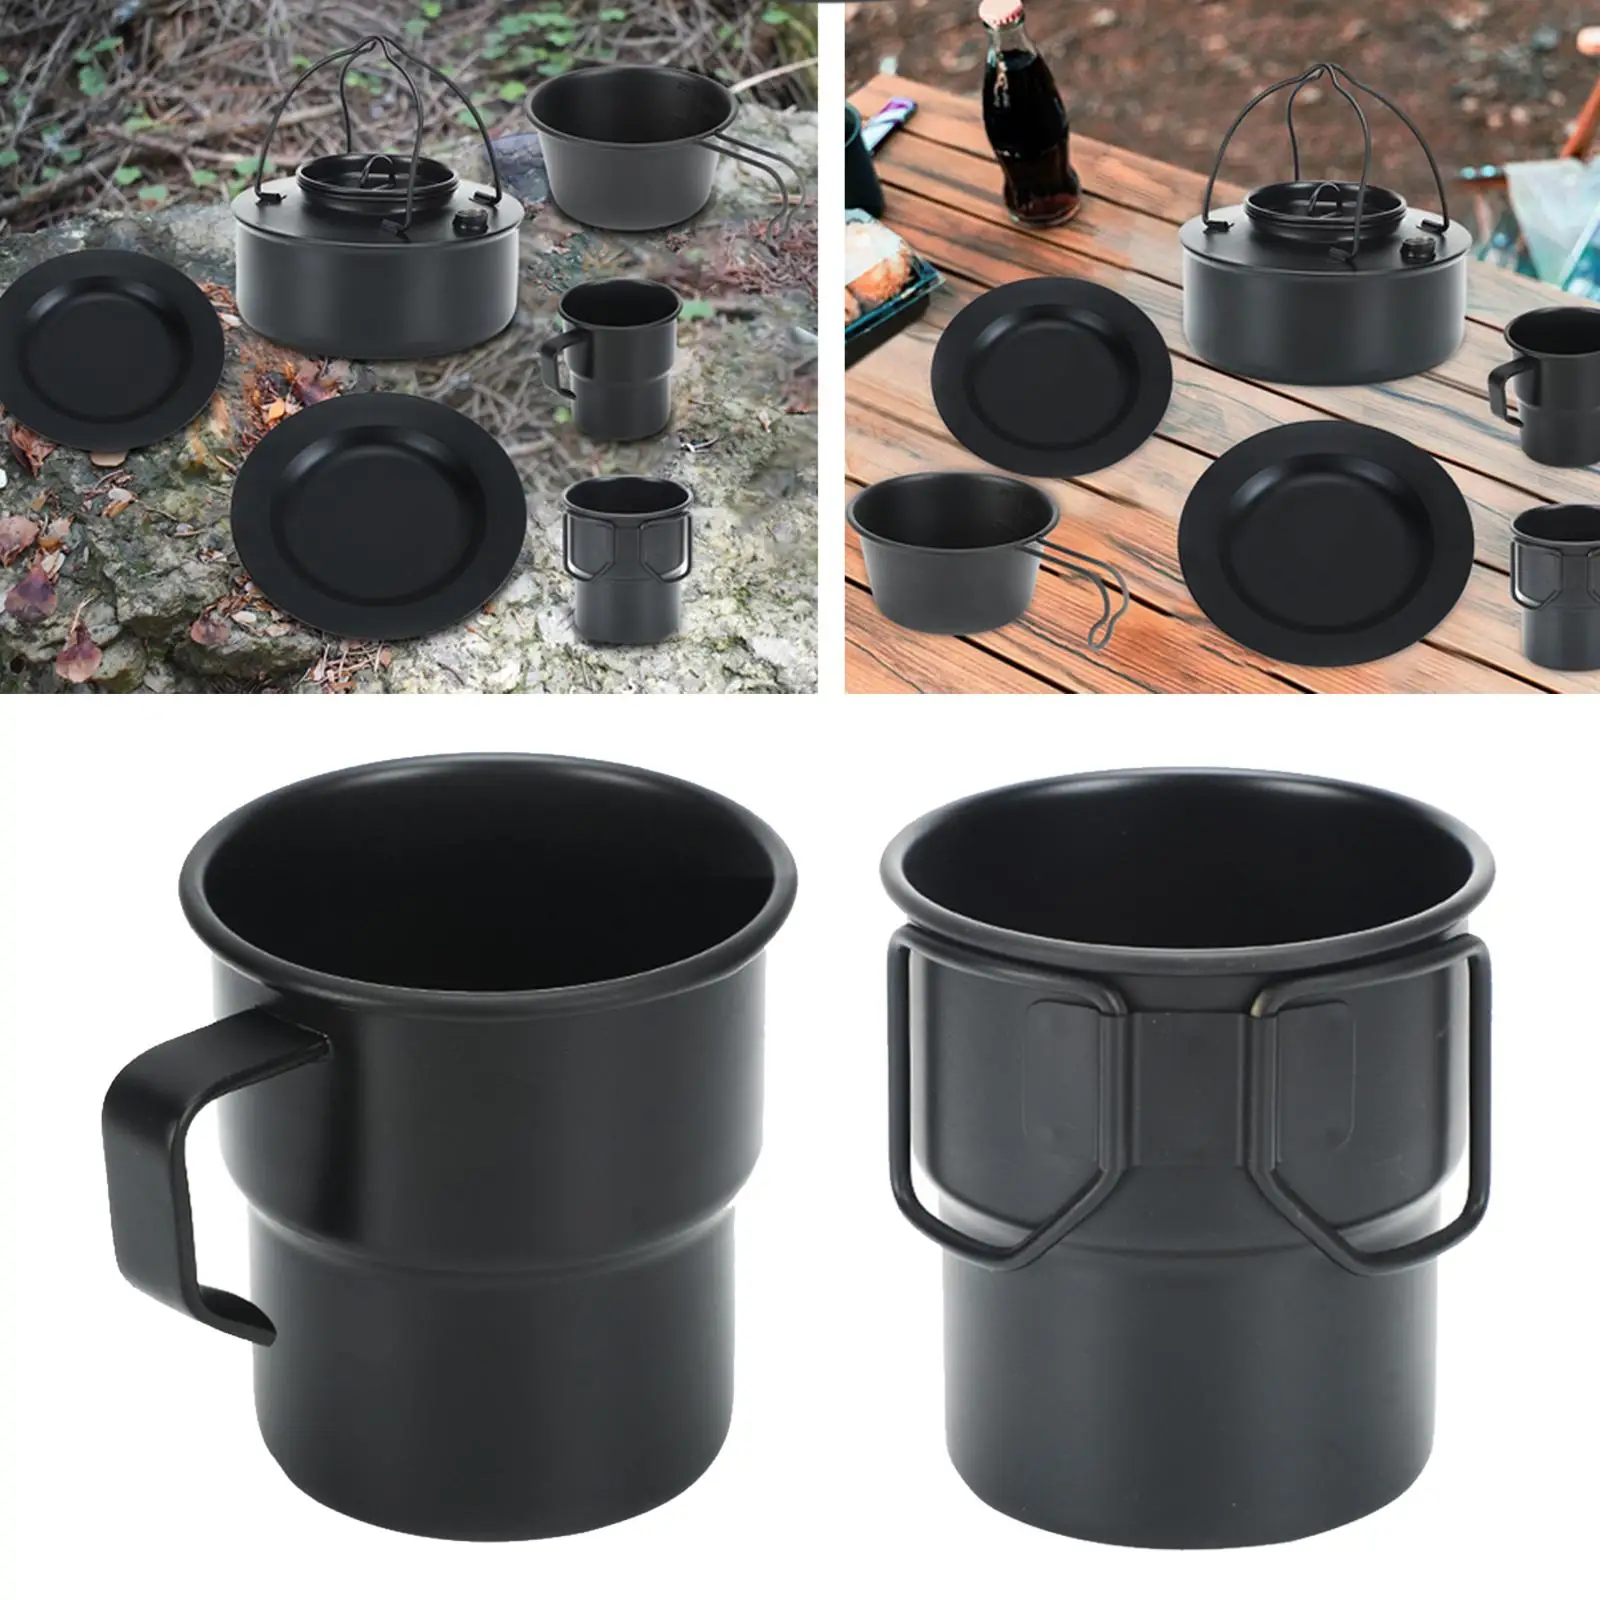 Lightweight Camping Cup Tableware Outdoor Tea Coffee Mug for Picnic Hiking